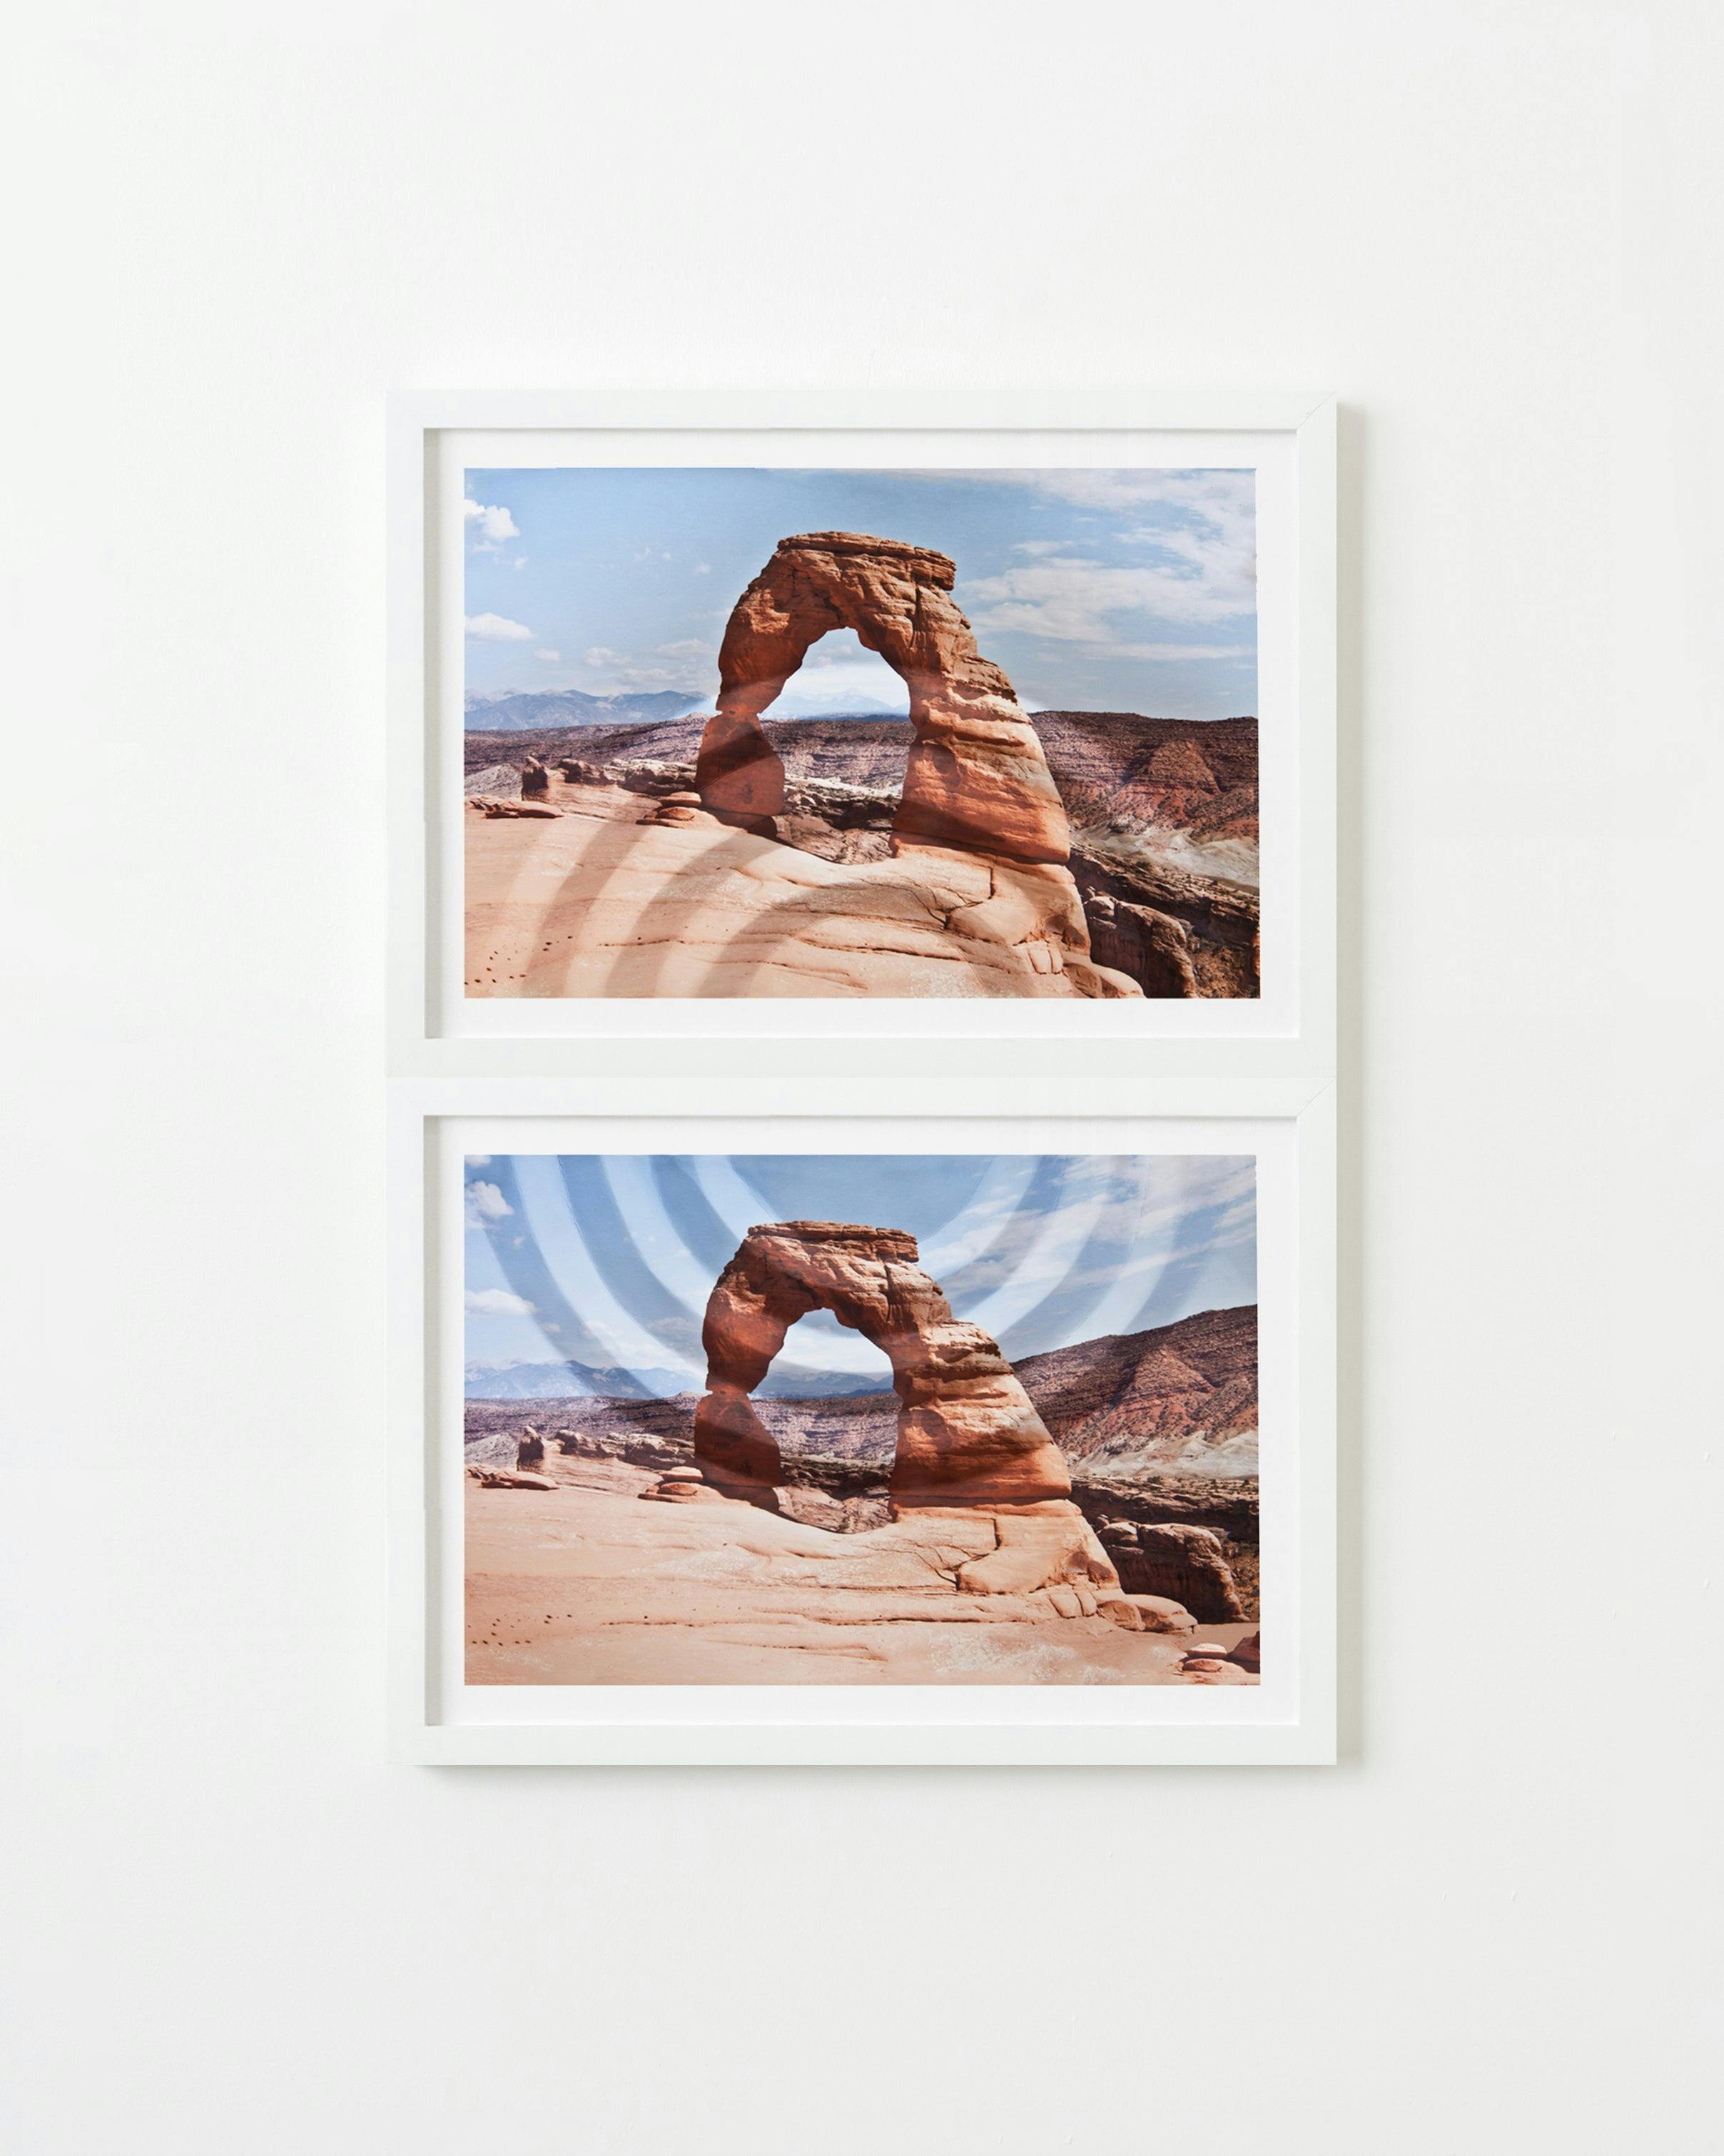 Photography by Millee Tibbs titled "Mountains + Valleys (Arches, Diptych)".